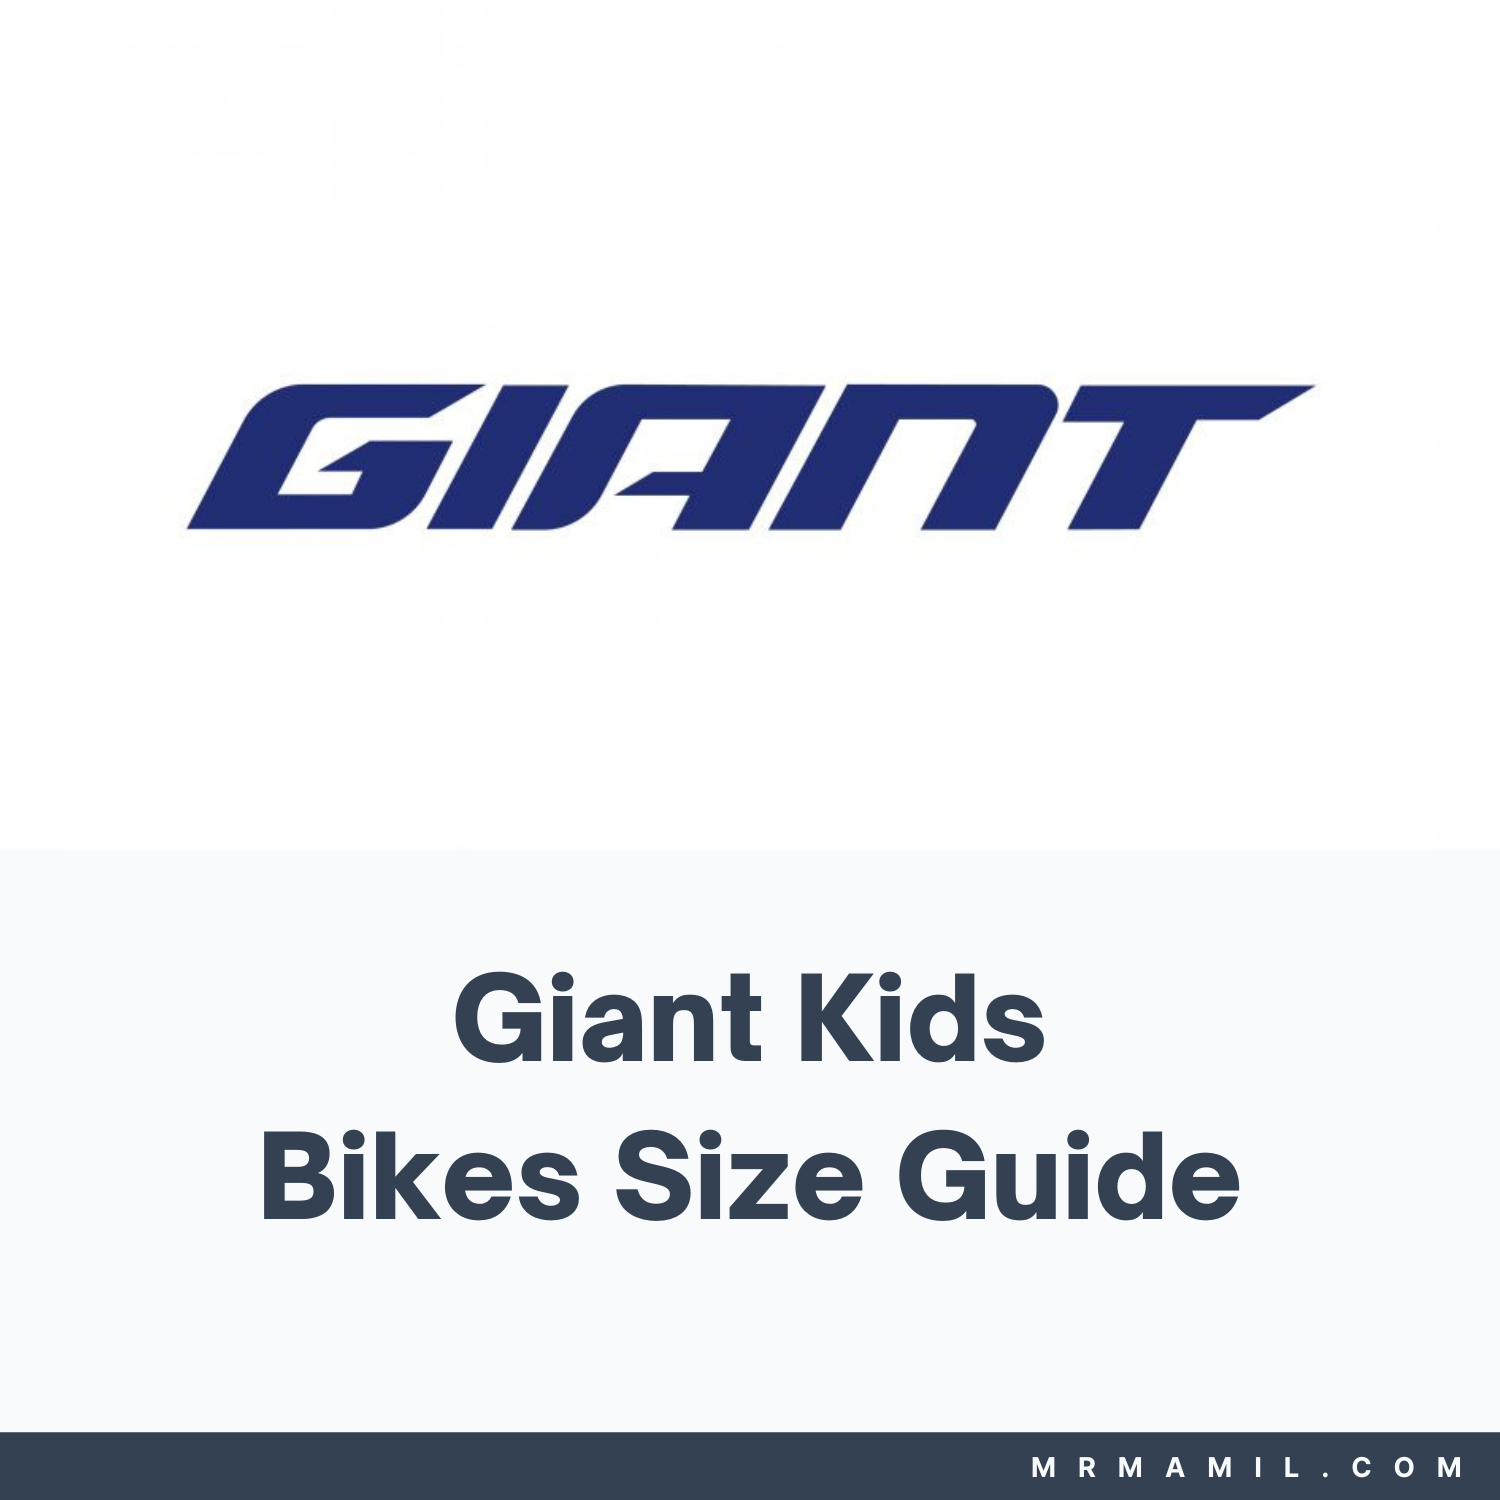 Giant Kids Bikes Size Guide